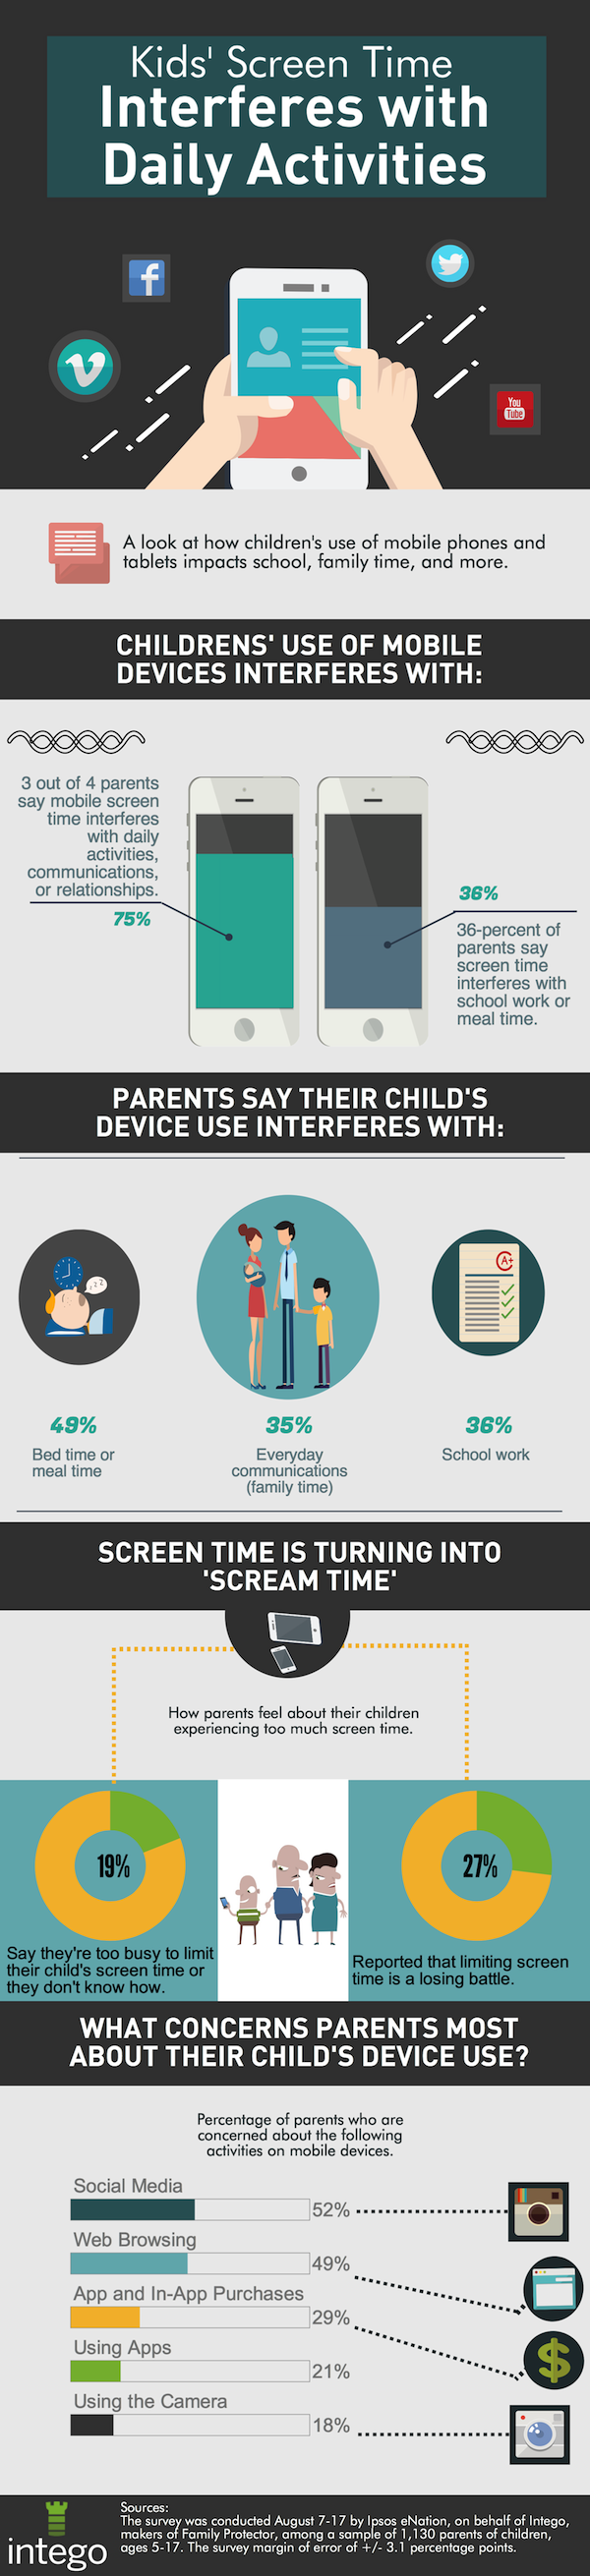 Kids Screen Time Interferes with Daily Activities Infographic